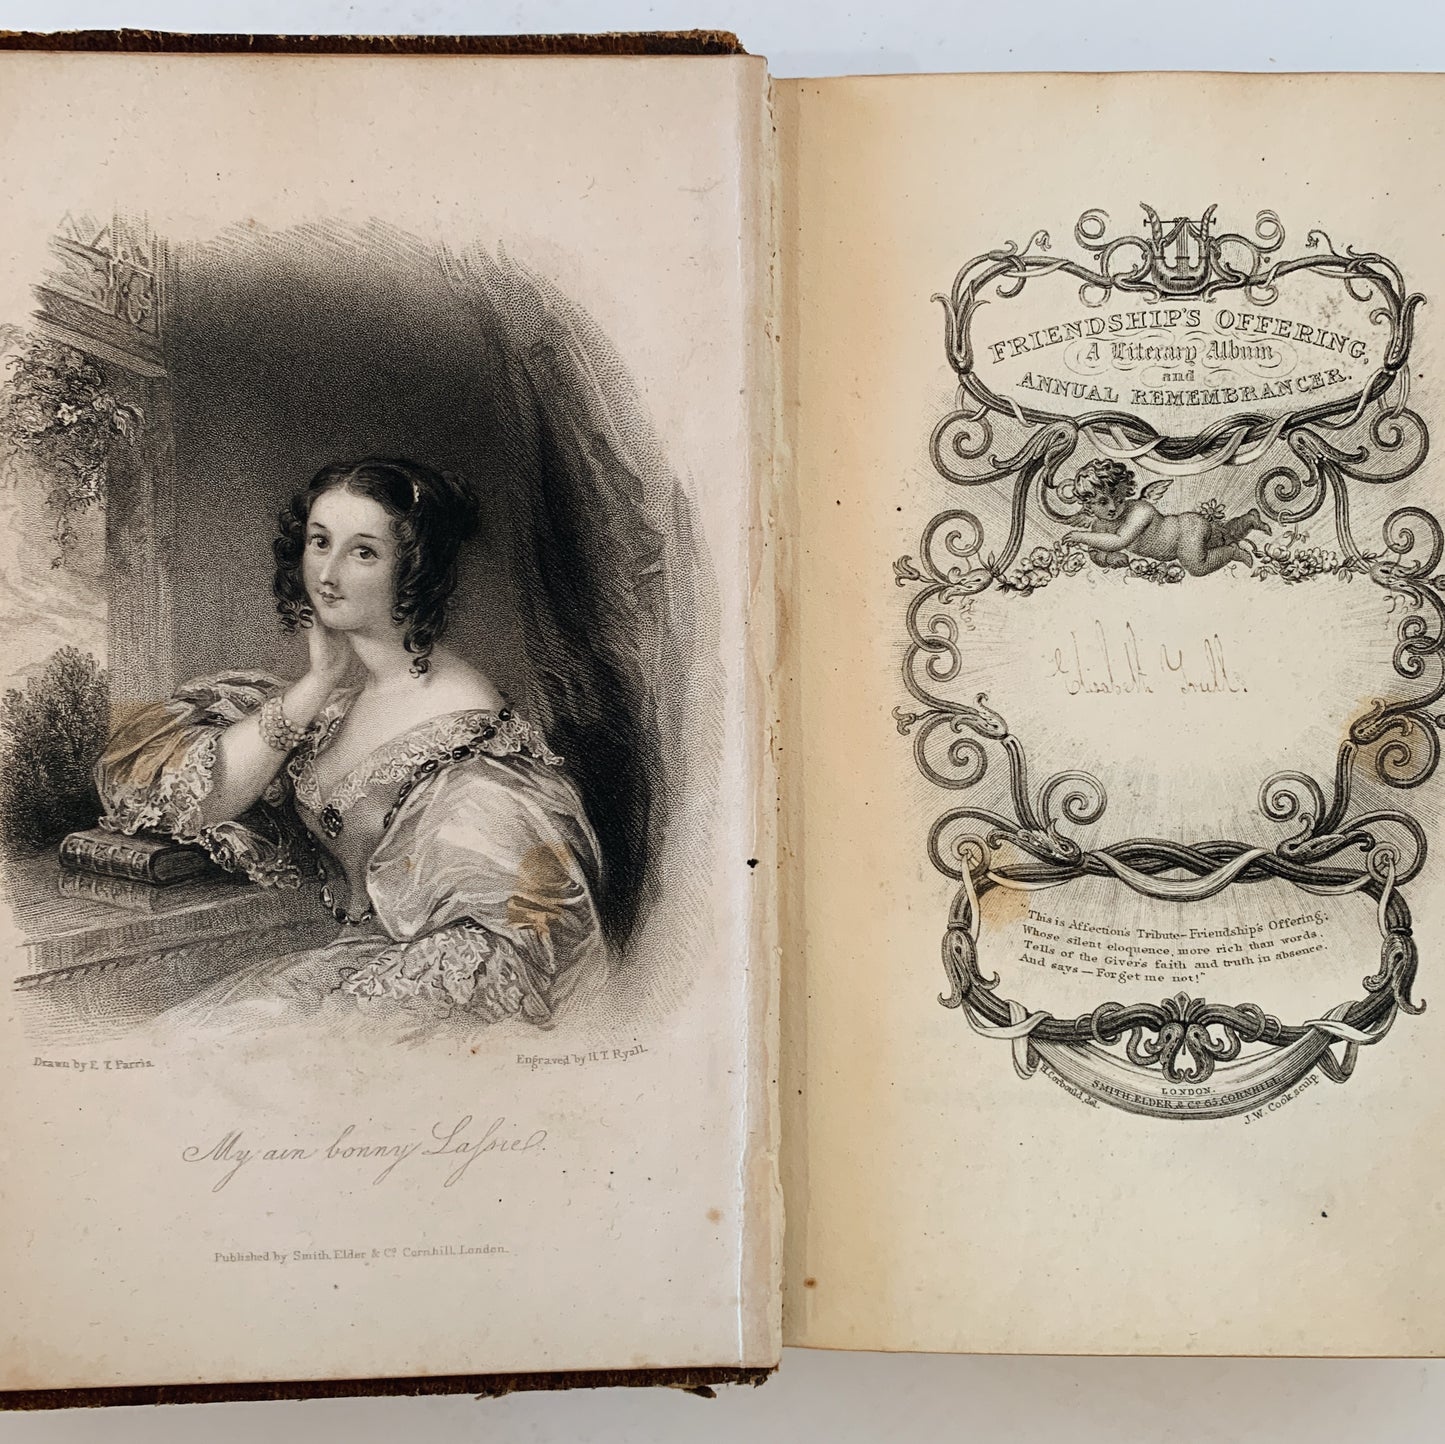 Friendship's Offerings and Winter's Wreath: A Christmas and New Year's Present, 1835, 1838